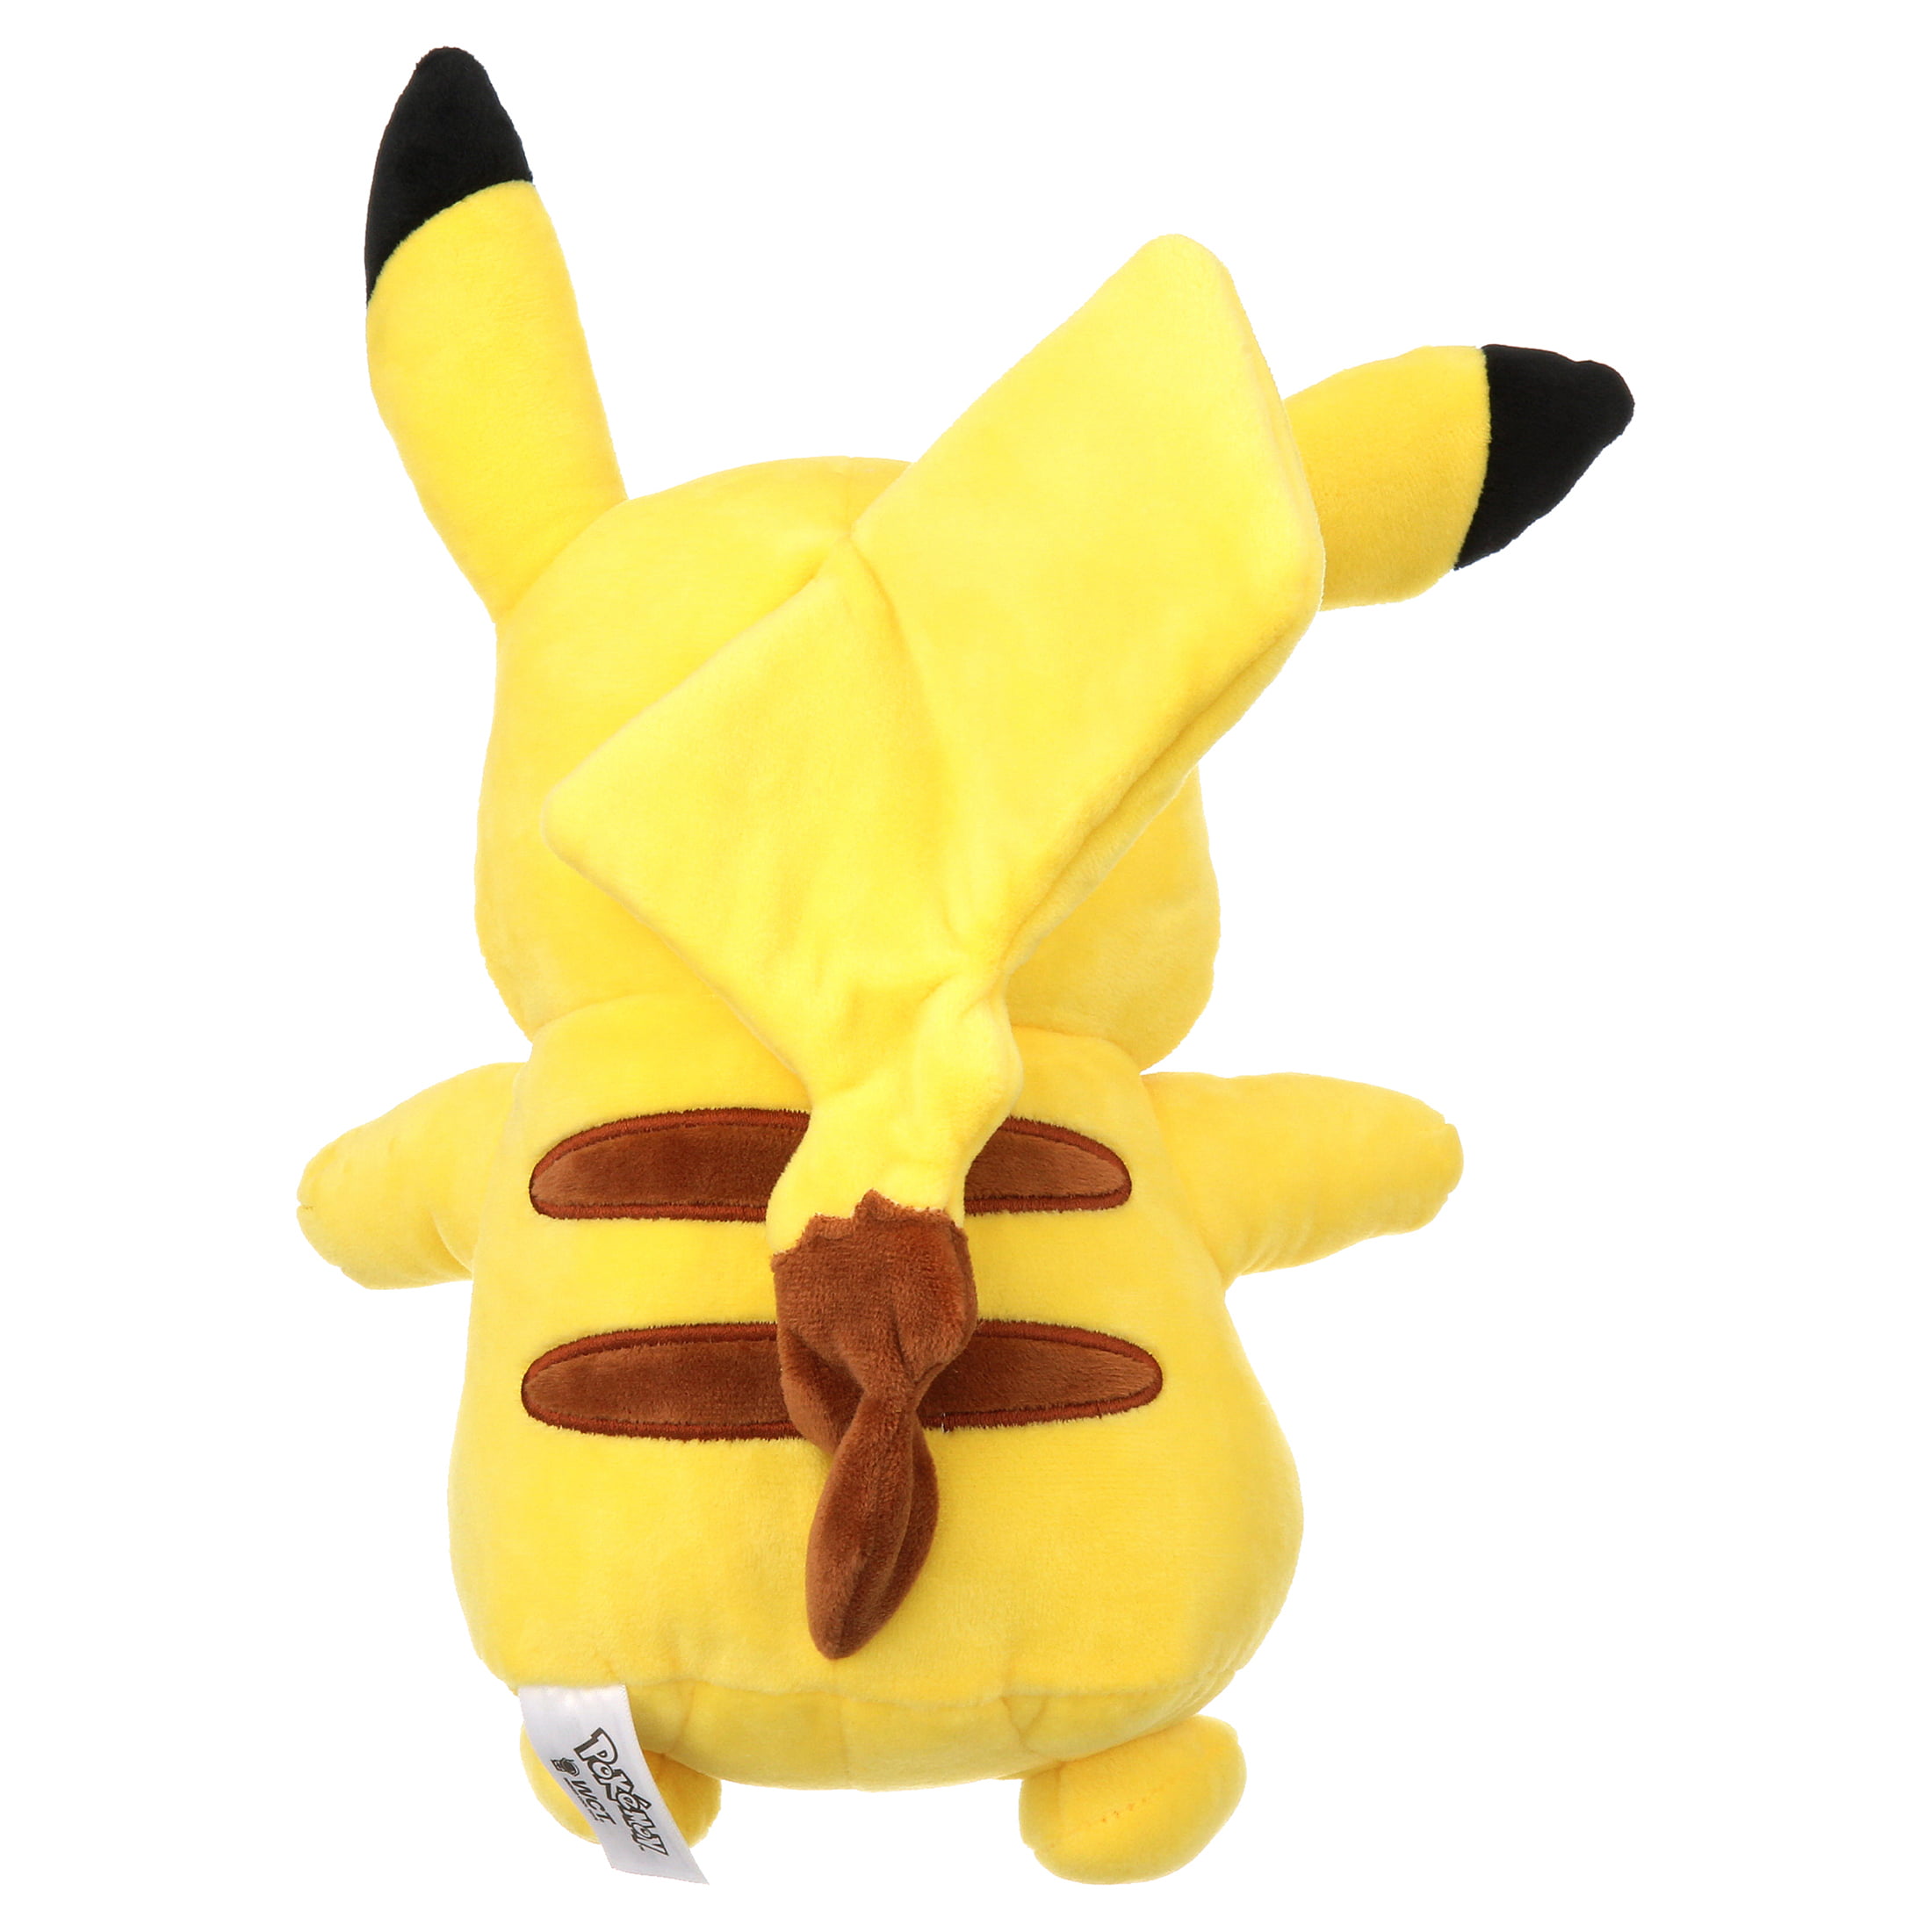 Pokémon 12 Large Pikachu Plush - Officially Licensed - Quality & Soft  Stuffed Animal Toy - Generation One - Great Gift for Kids, Boys, Girls &  Fans